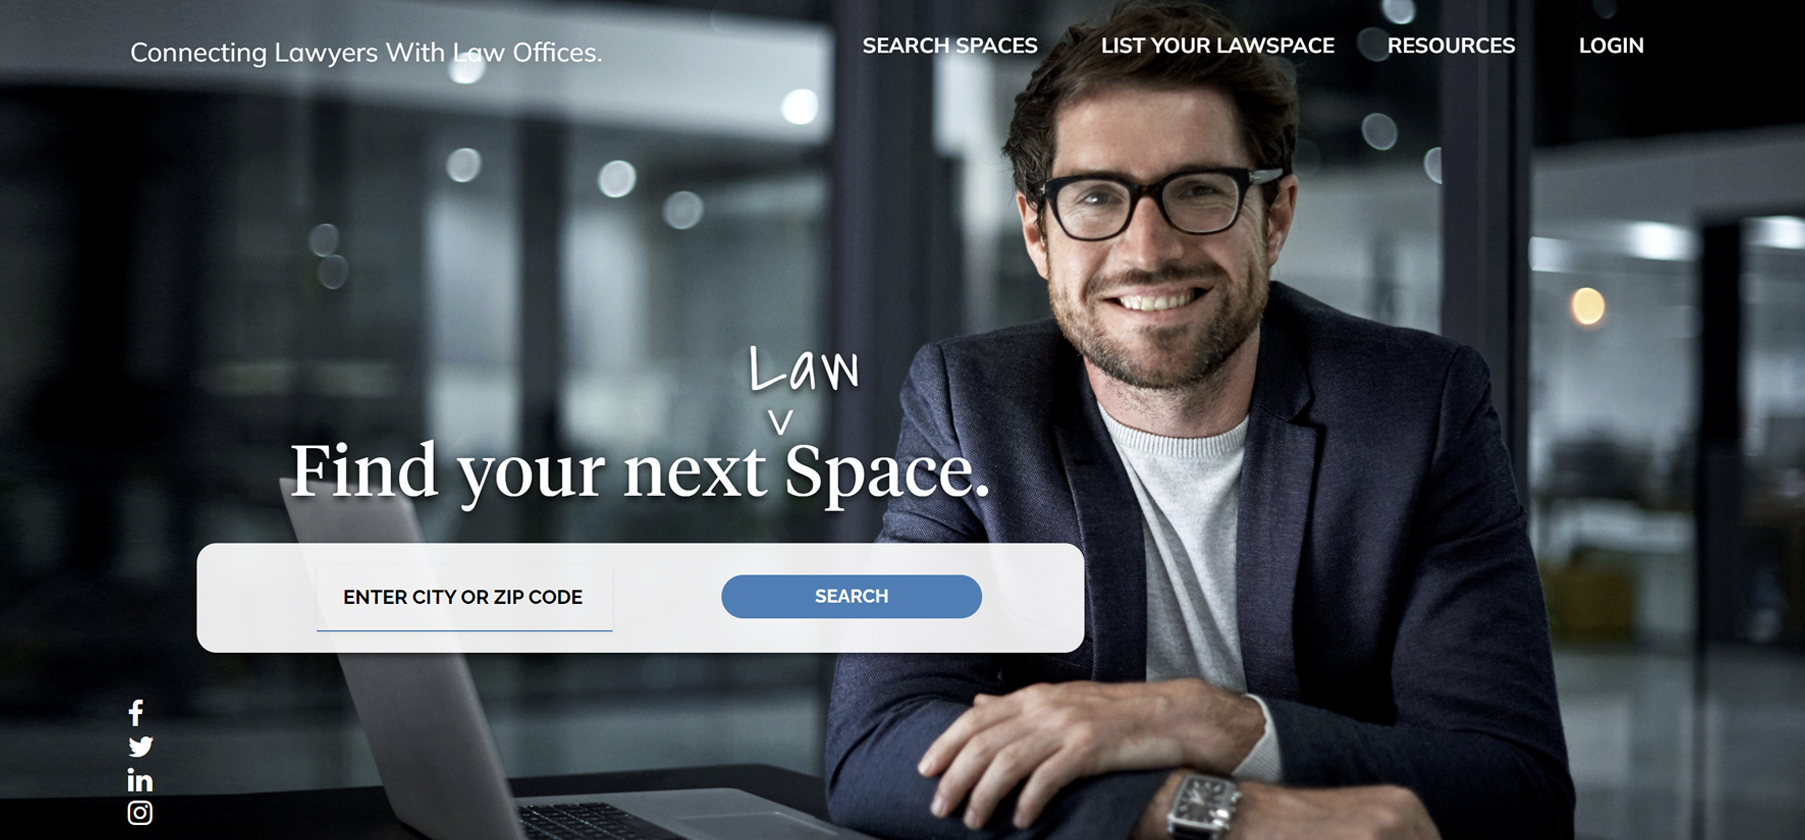 LawSpace Match Home Page Hero Image